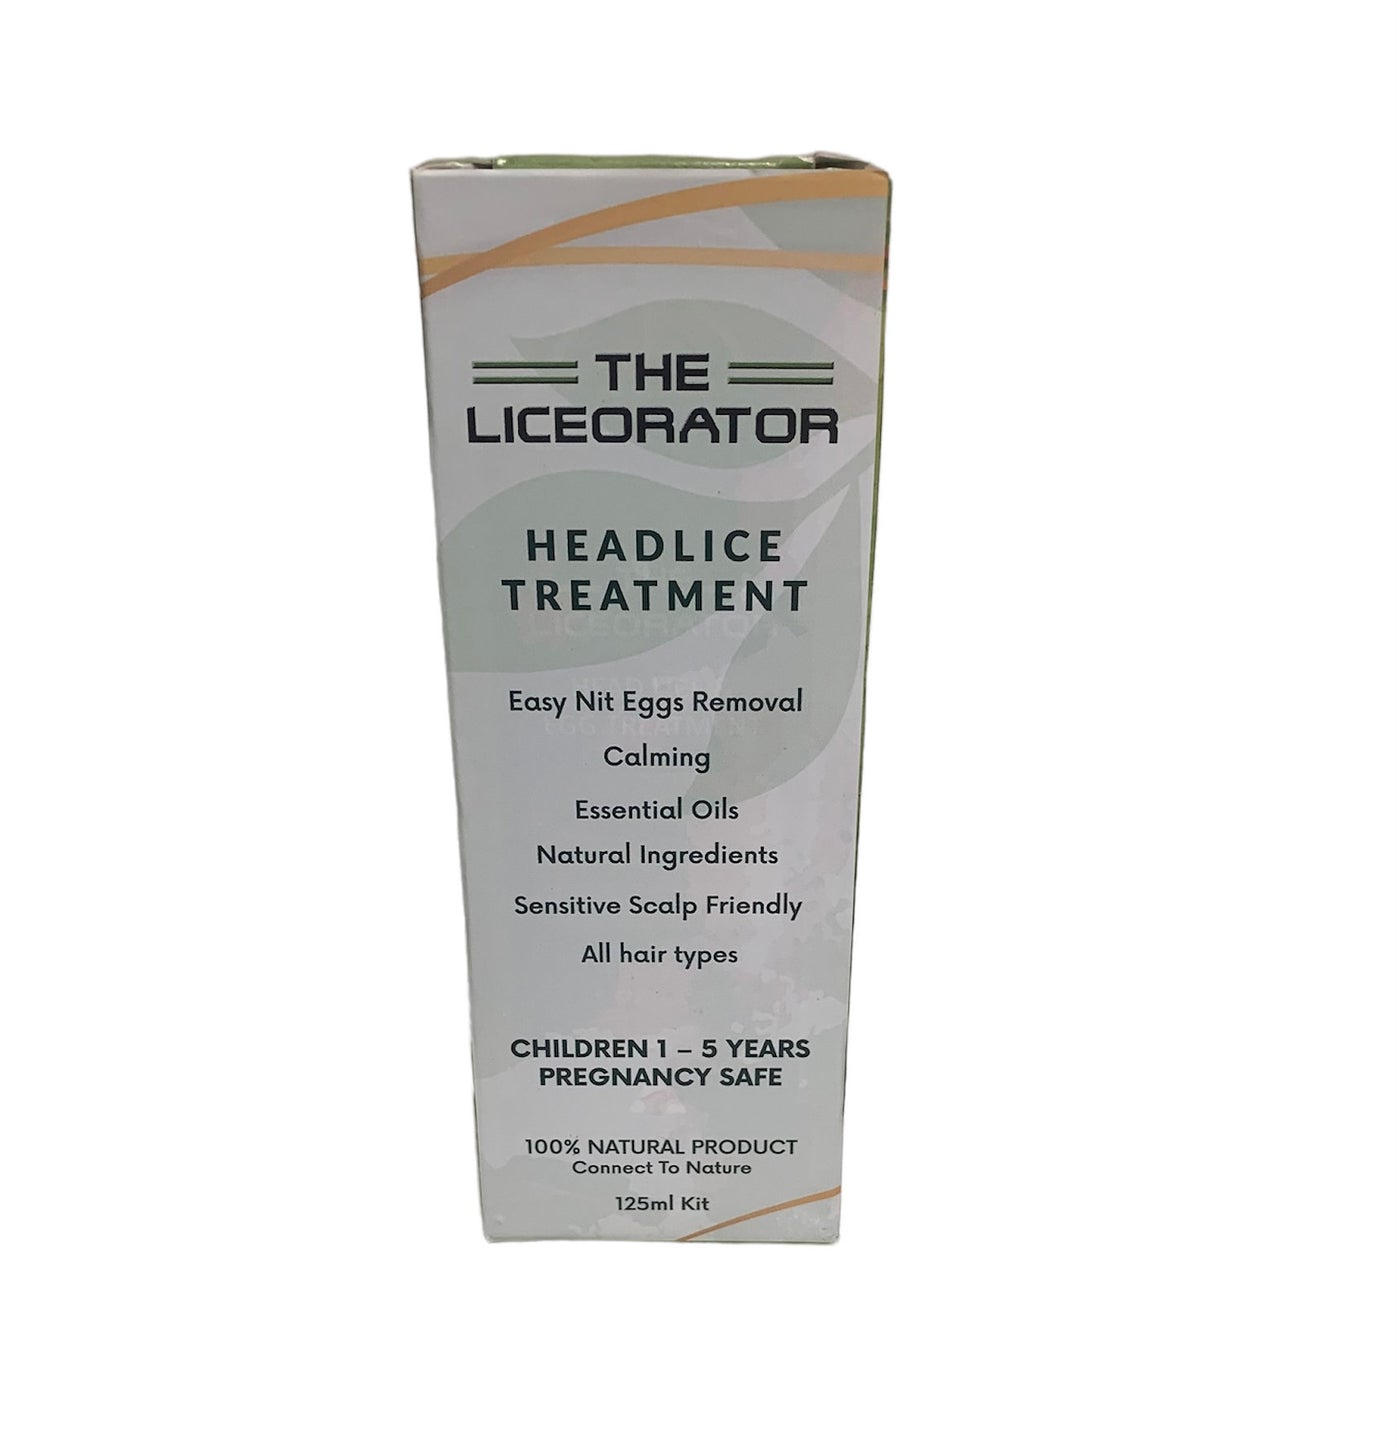 The Liceorator Under 5 Yrs old & for Pregnant Woman Kit 125ml